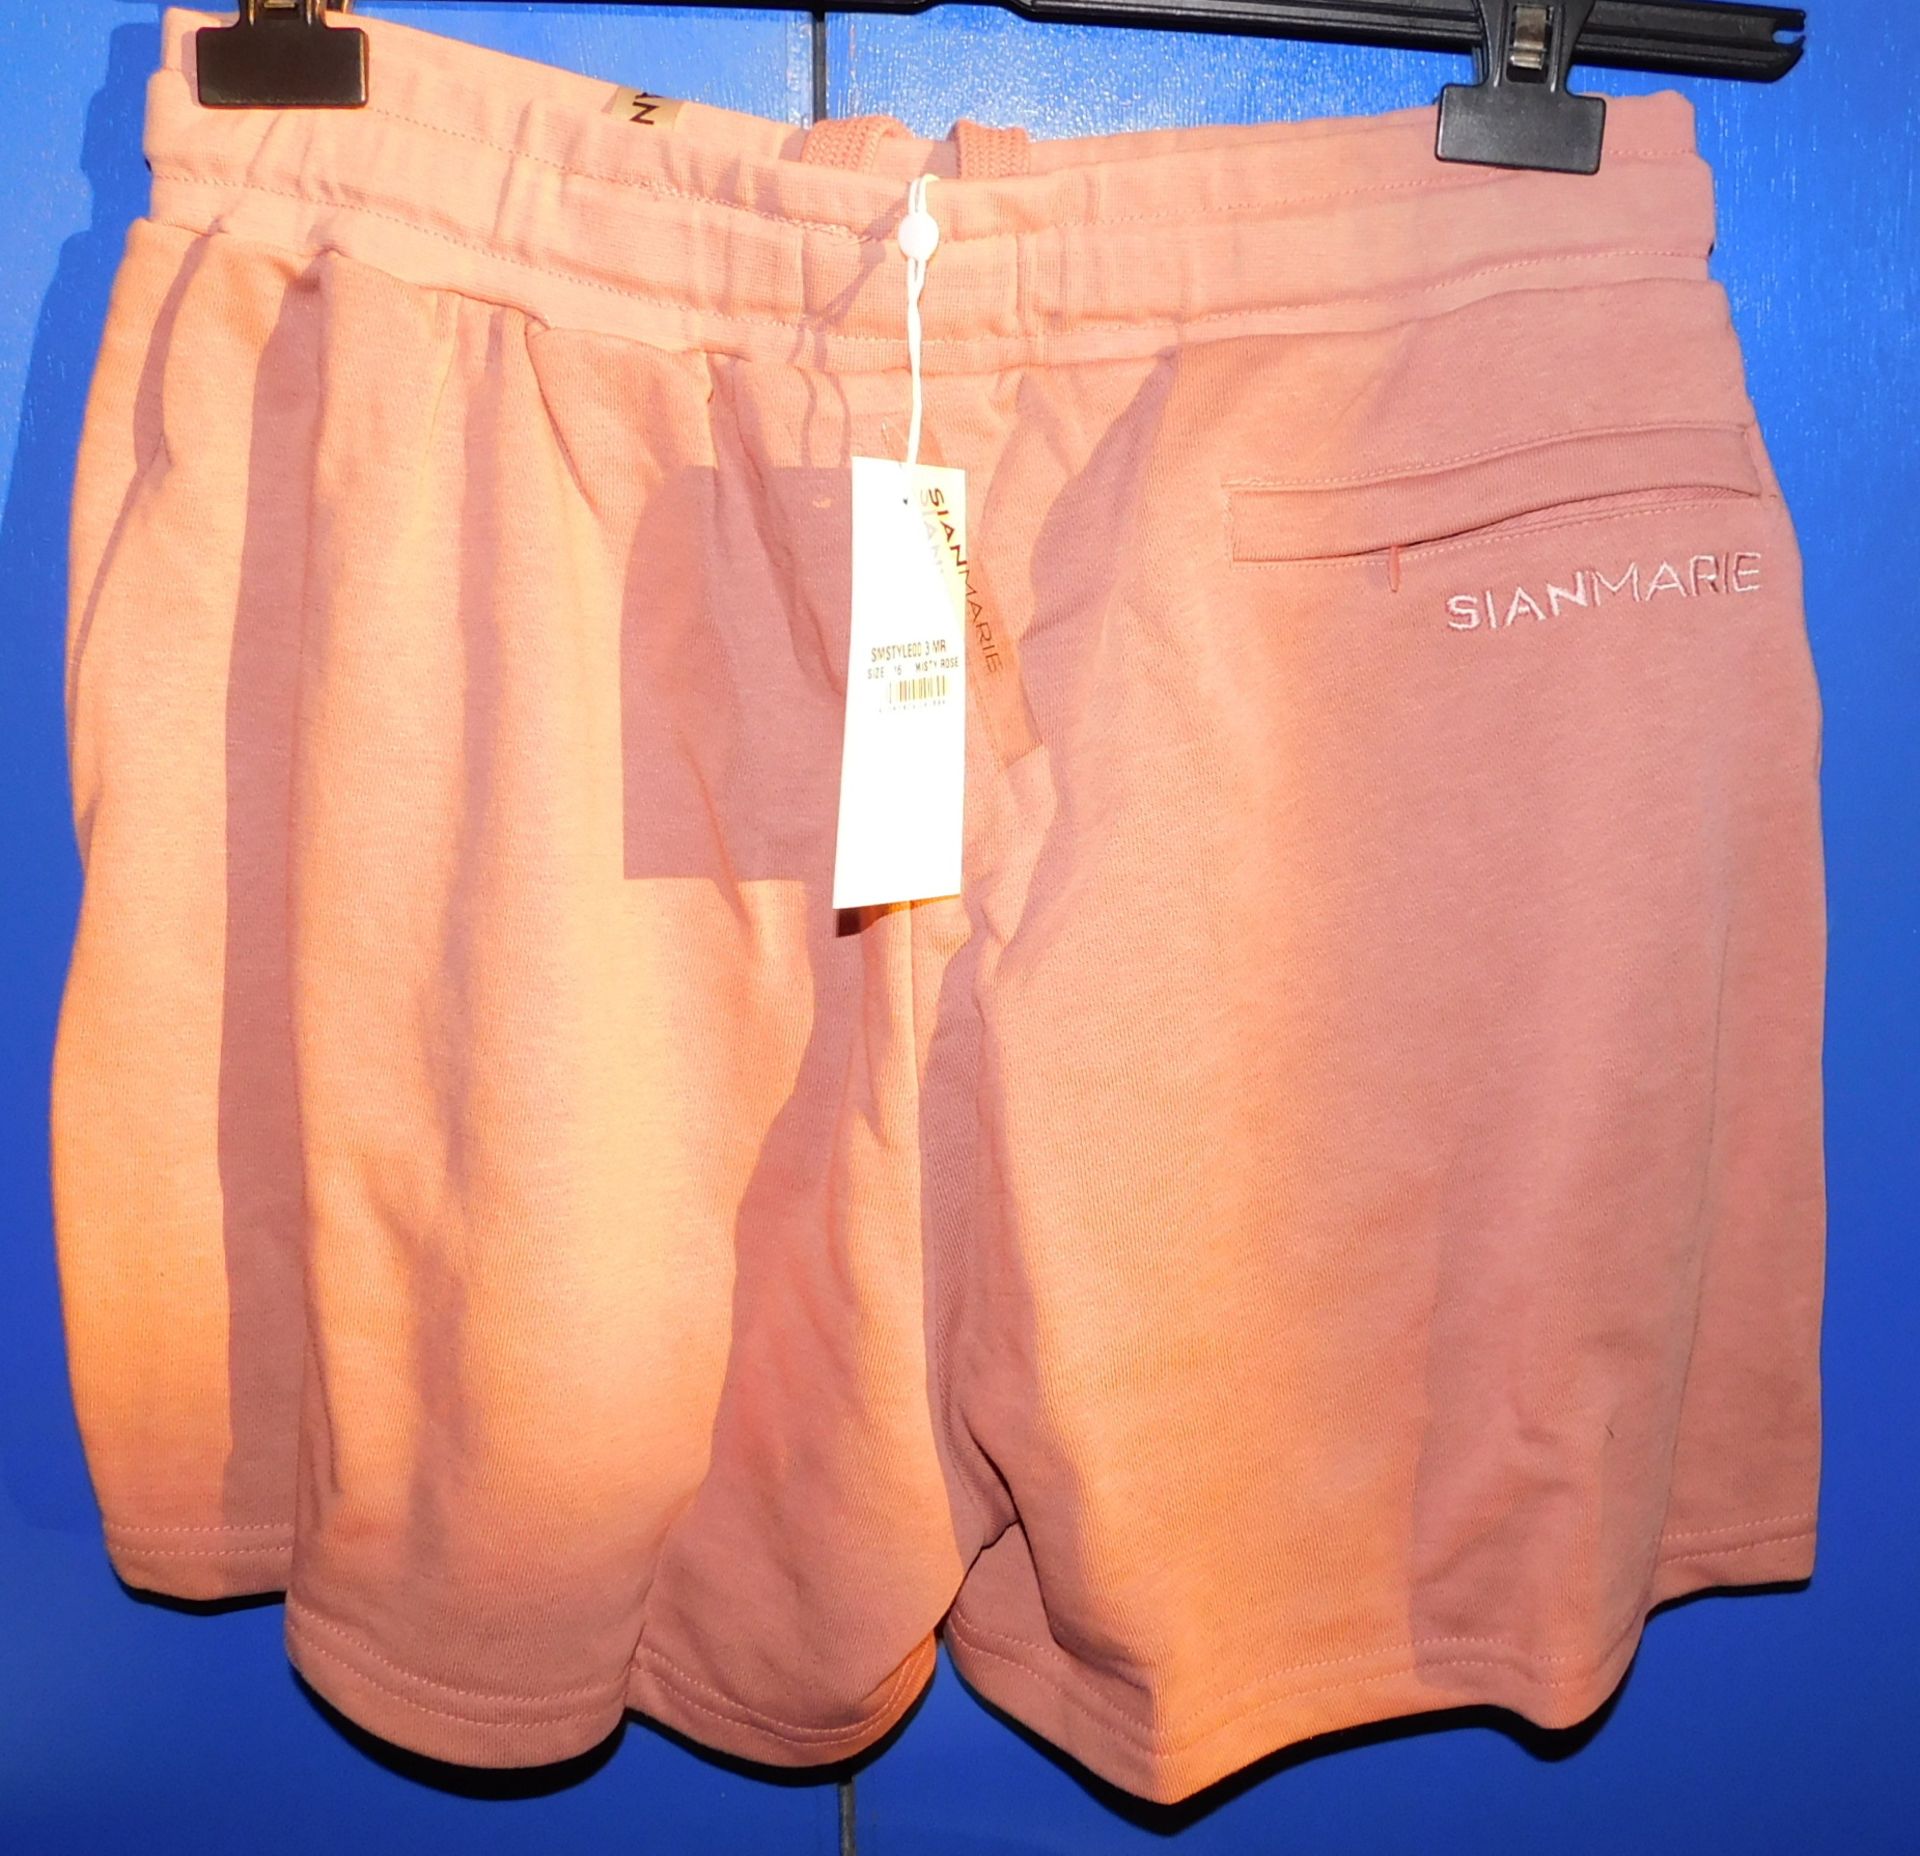 291 Sian Marie Acid Wash Shorts, Misty Rose (9 Boxes) (Location Stockport. Please Refer to General - Image 2 of 4